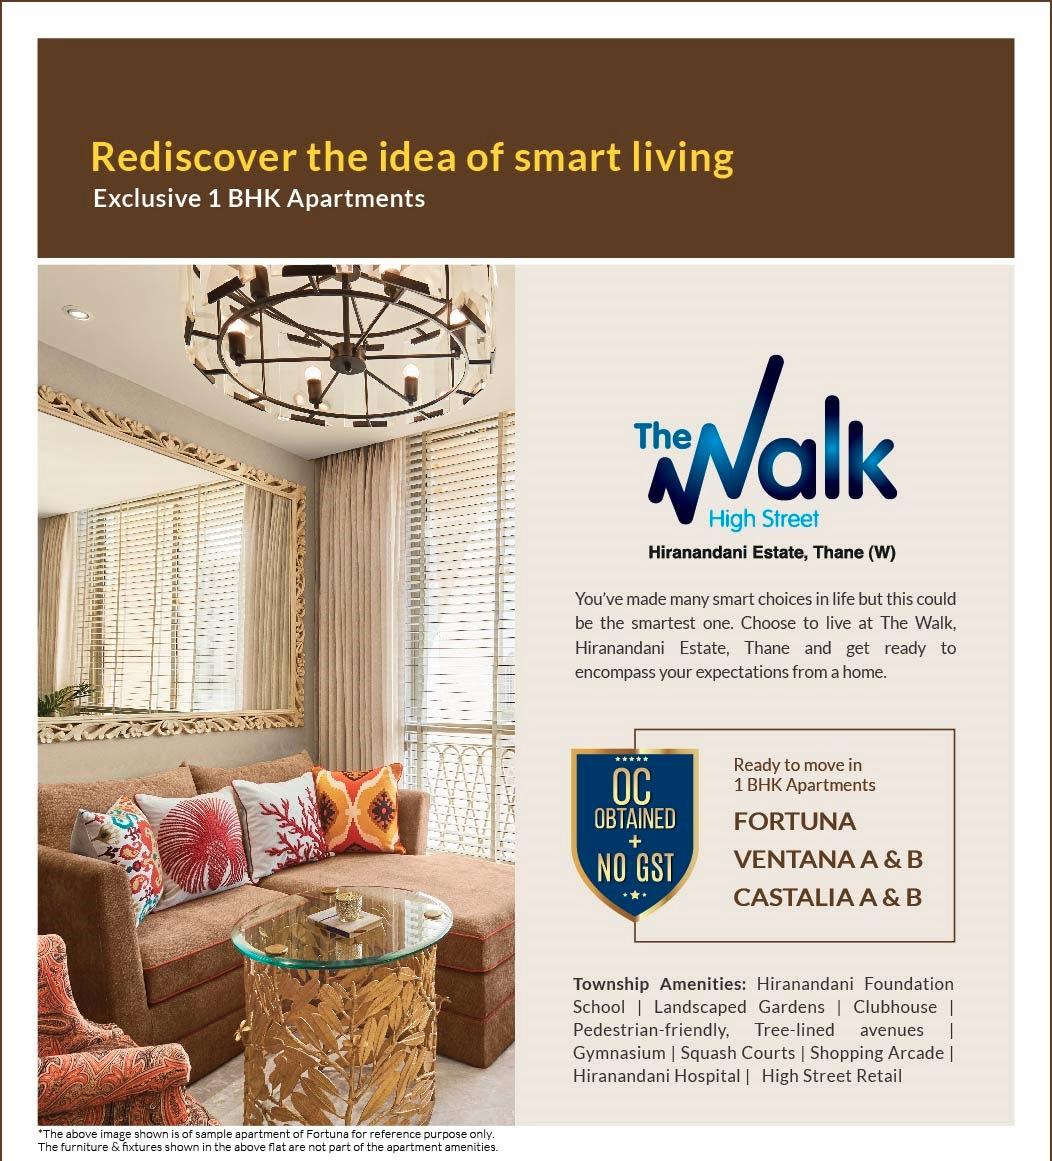 Rediscover the idea of smart living with exclusive 1 BHK apartments at Hiranandani The Walk in Mumbai Update